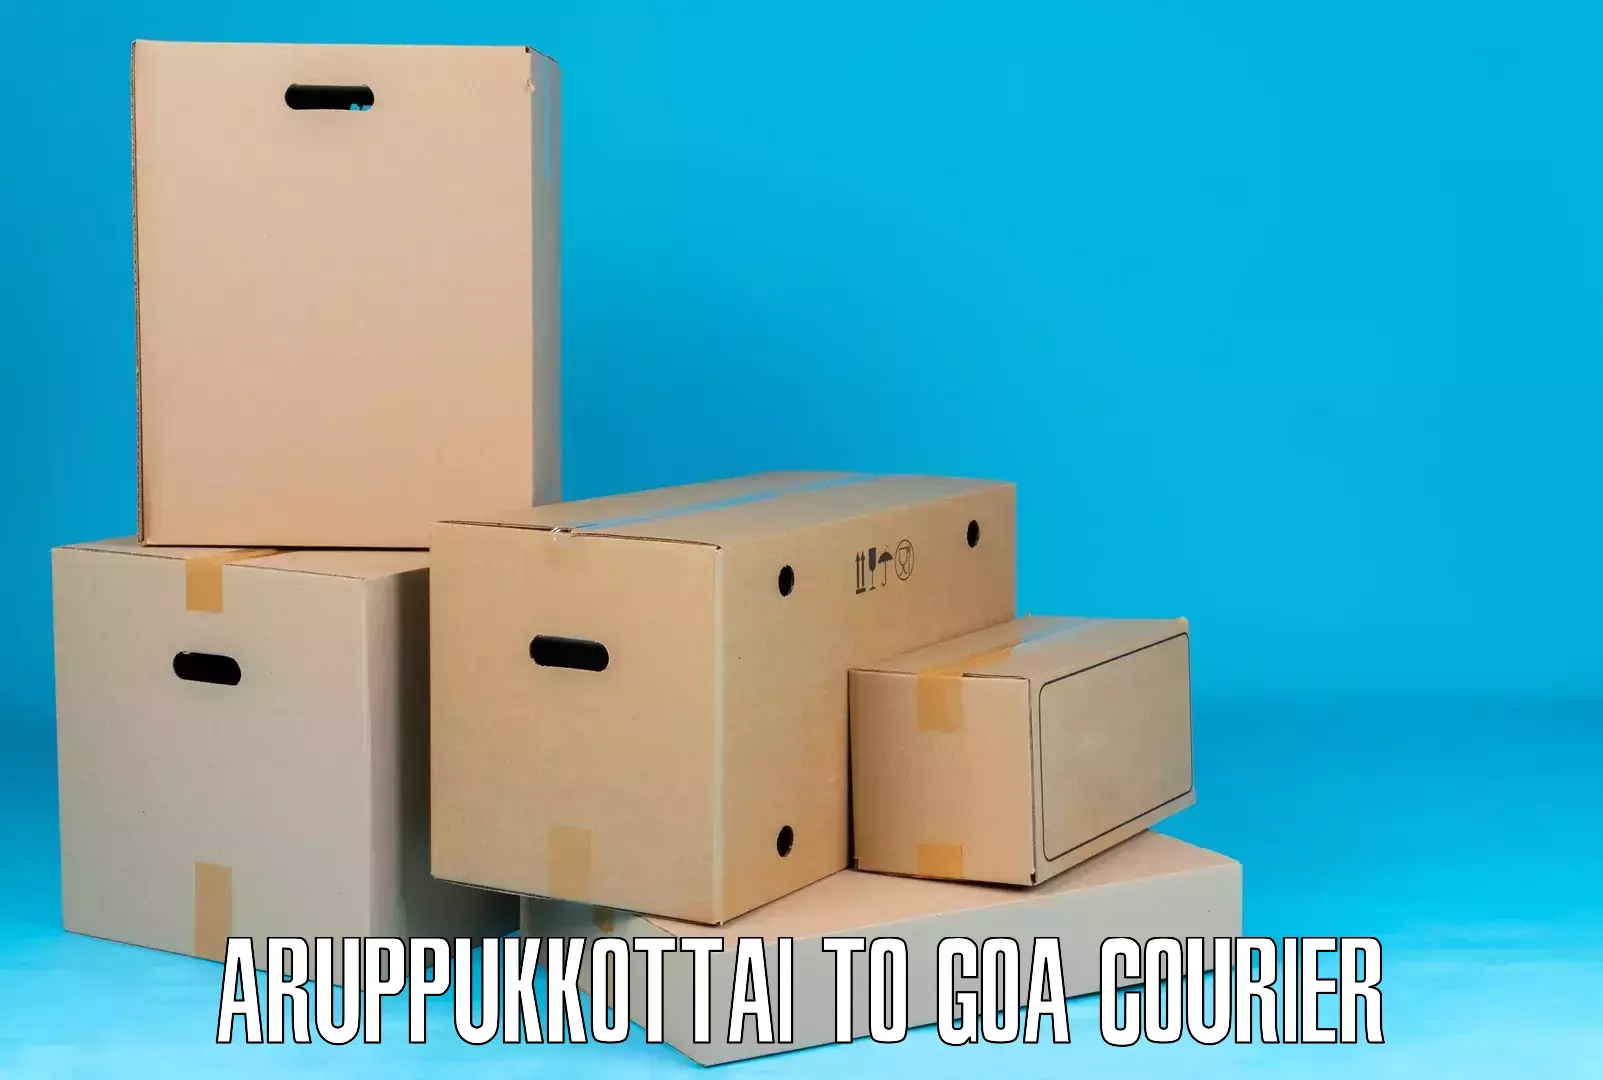 State-of-the-art courier technology Aruppukkottai to Canacona